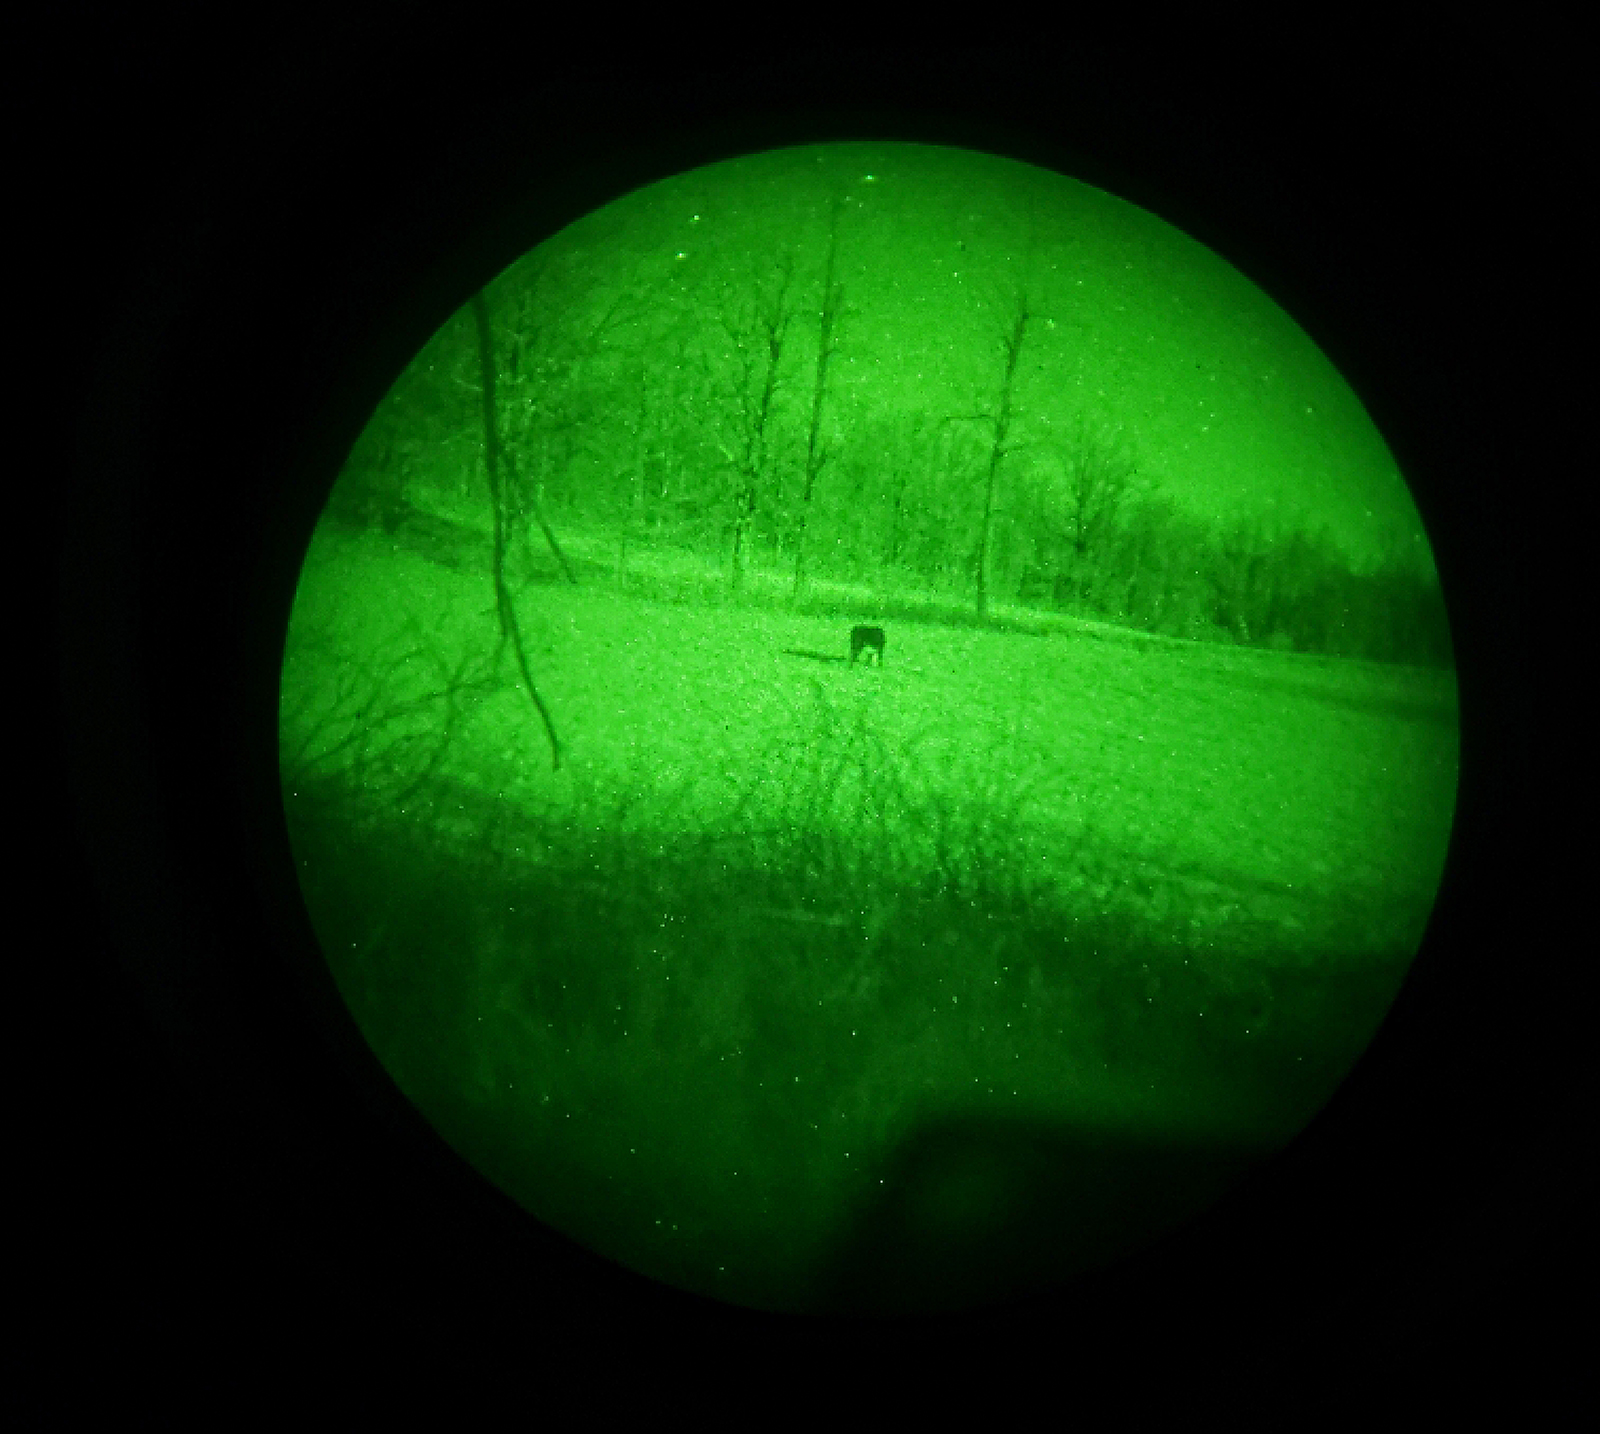 An image of a deer in a field seen through the green glow of a high-tech infrared camera.